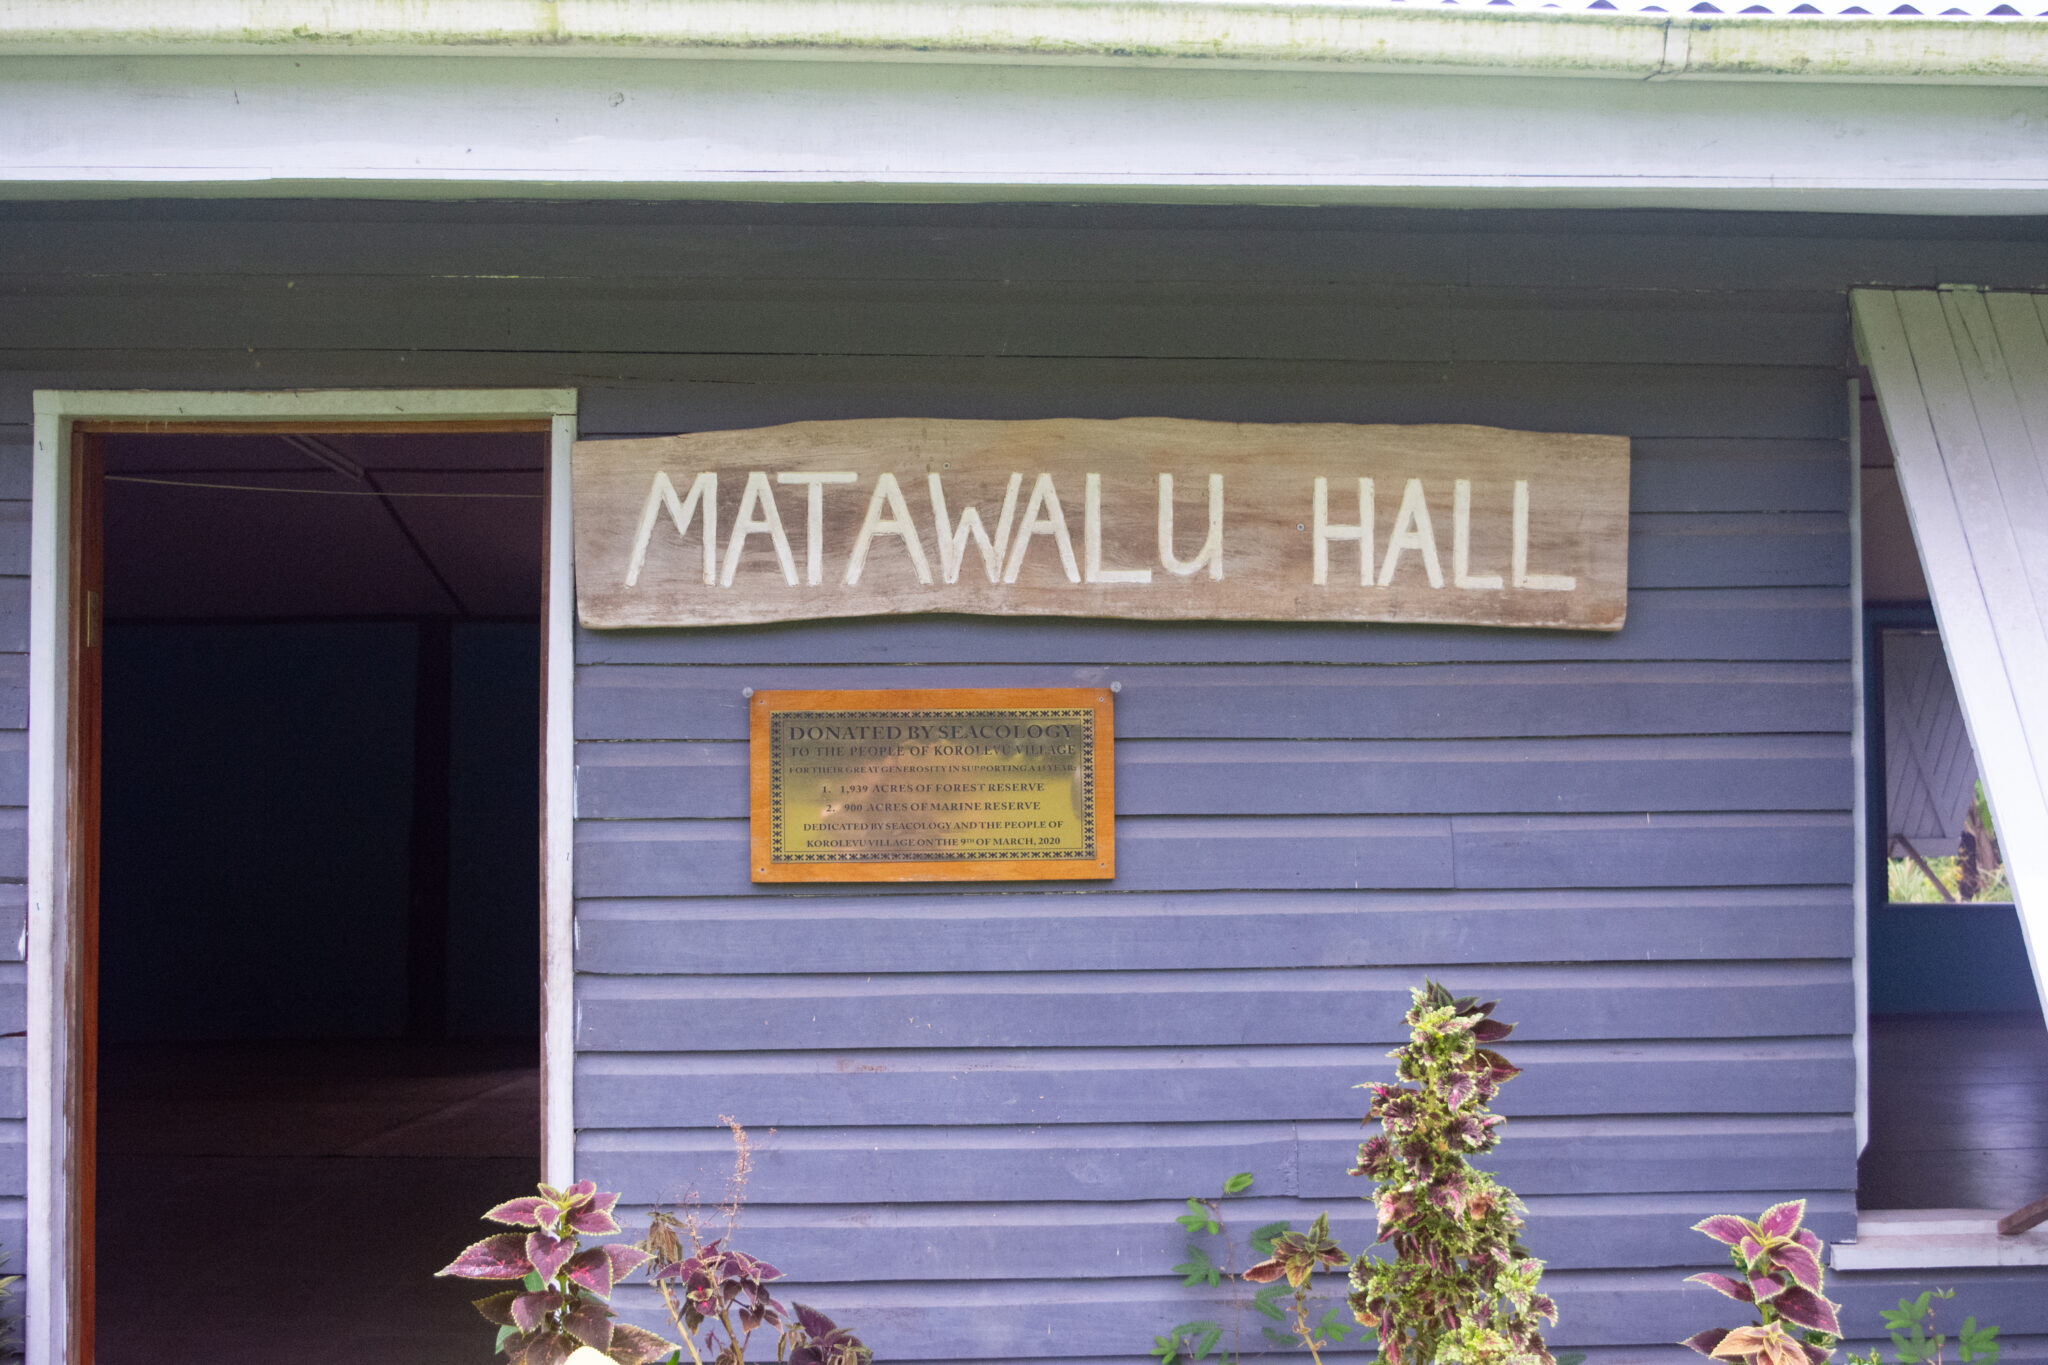 front of community hall with sign and dedication plaque